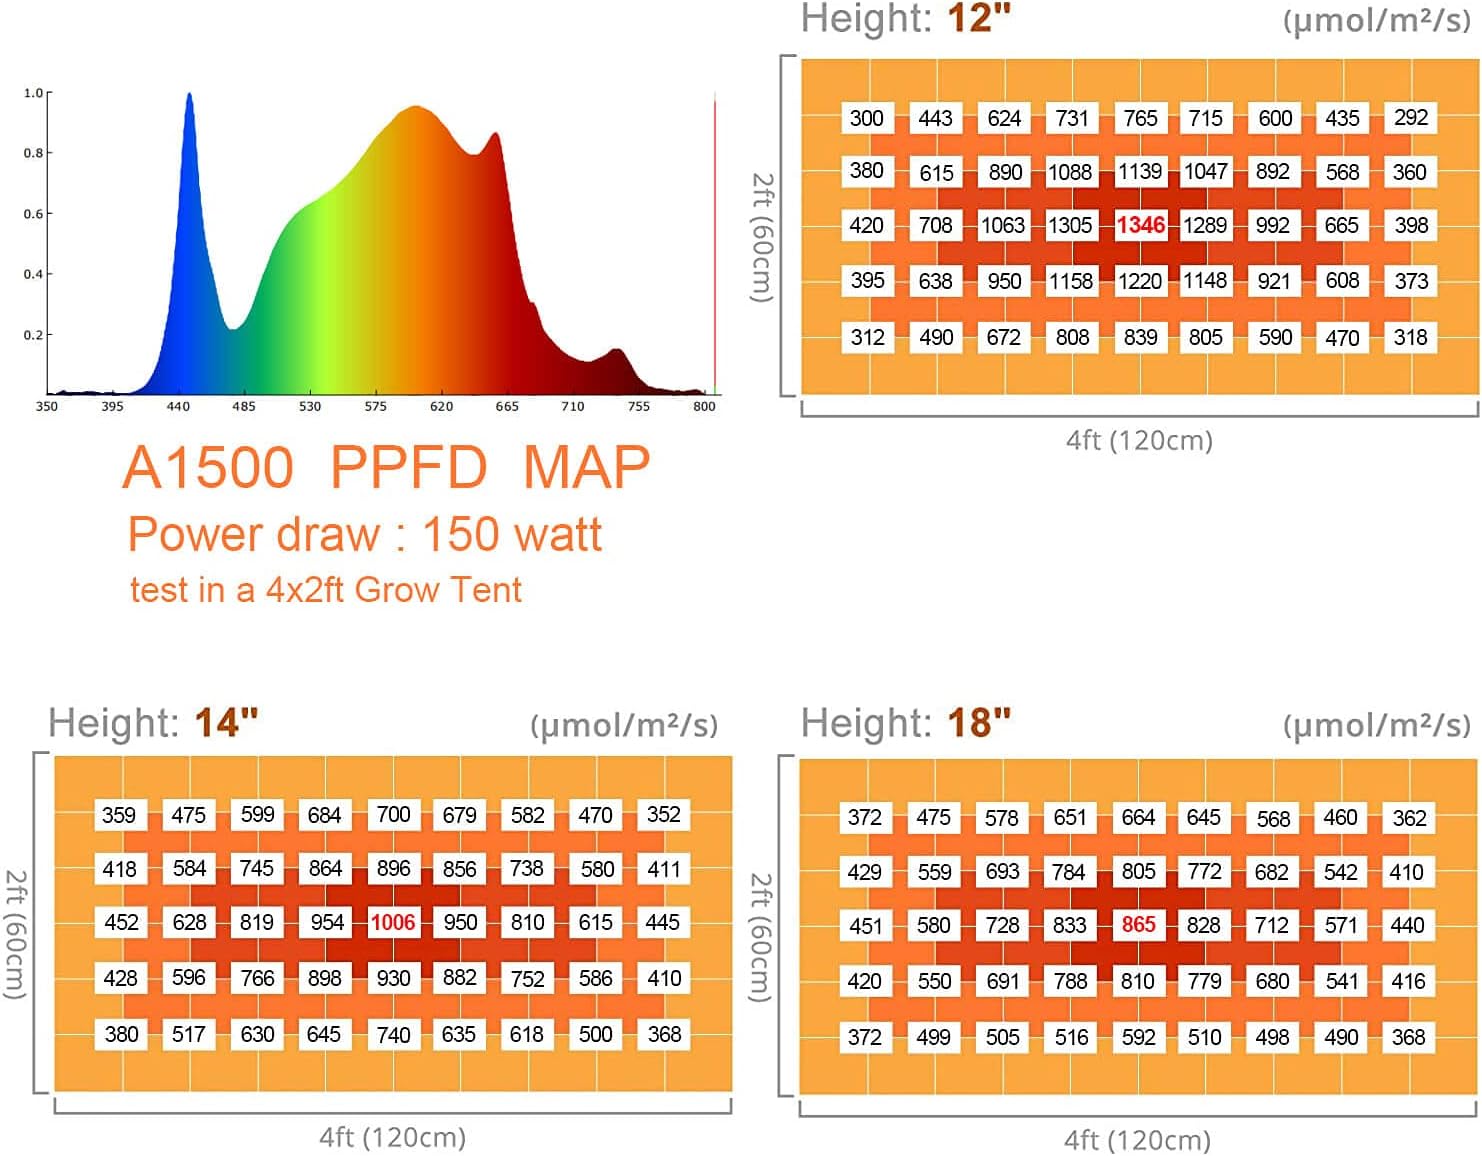 Abriselux A1500 LED Grow Light Dimmable with 4x4ft Coverage and Upgraded Larger Board, Full Spectrum Grow Lamps for Indoor Hydroponic Growing Light with High PPFD (Actual Power 150W)